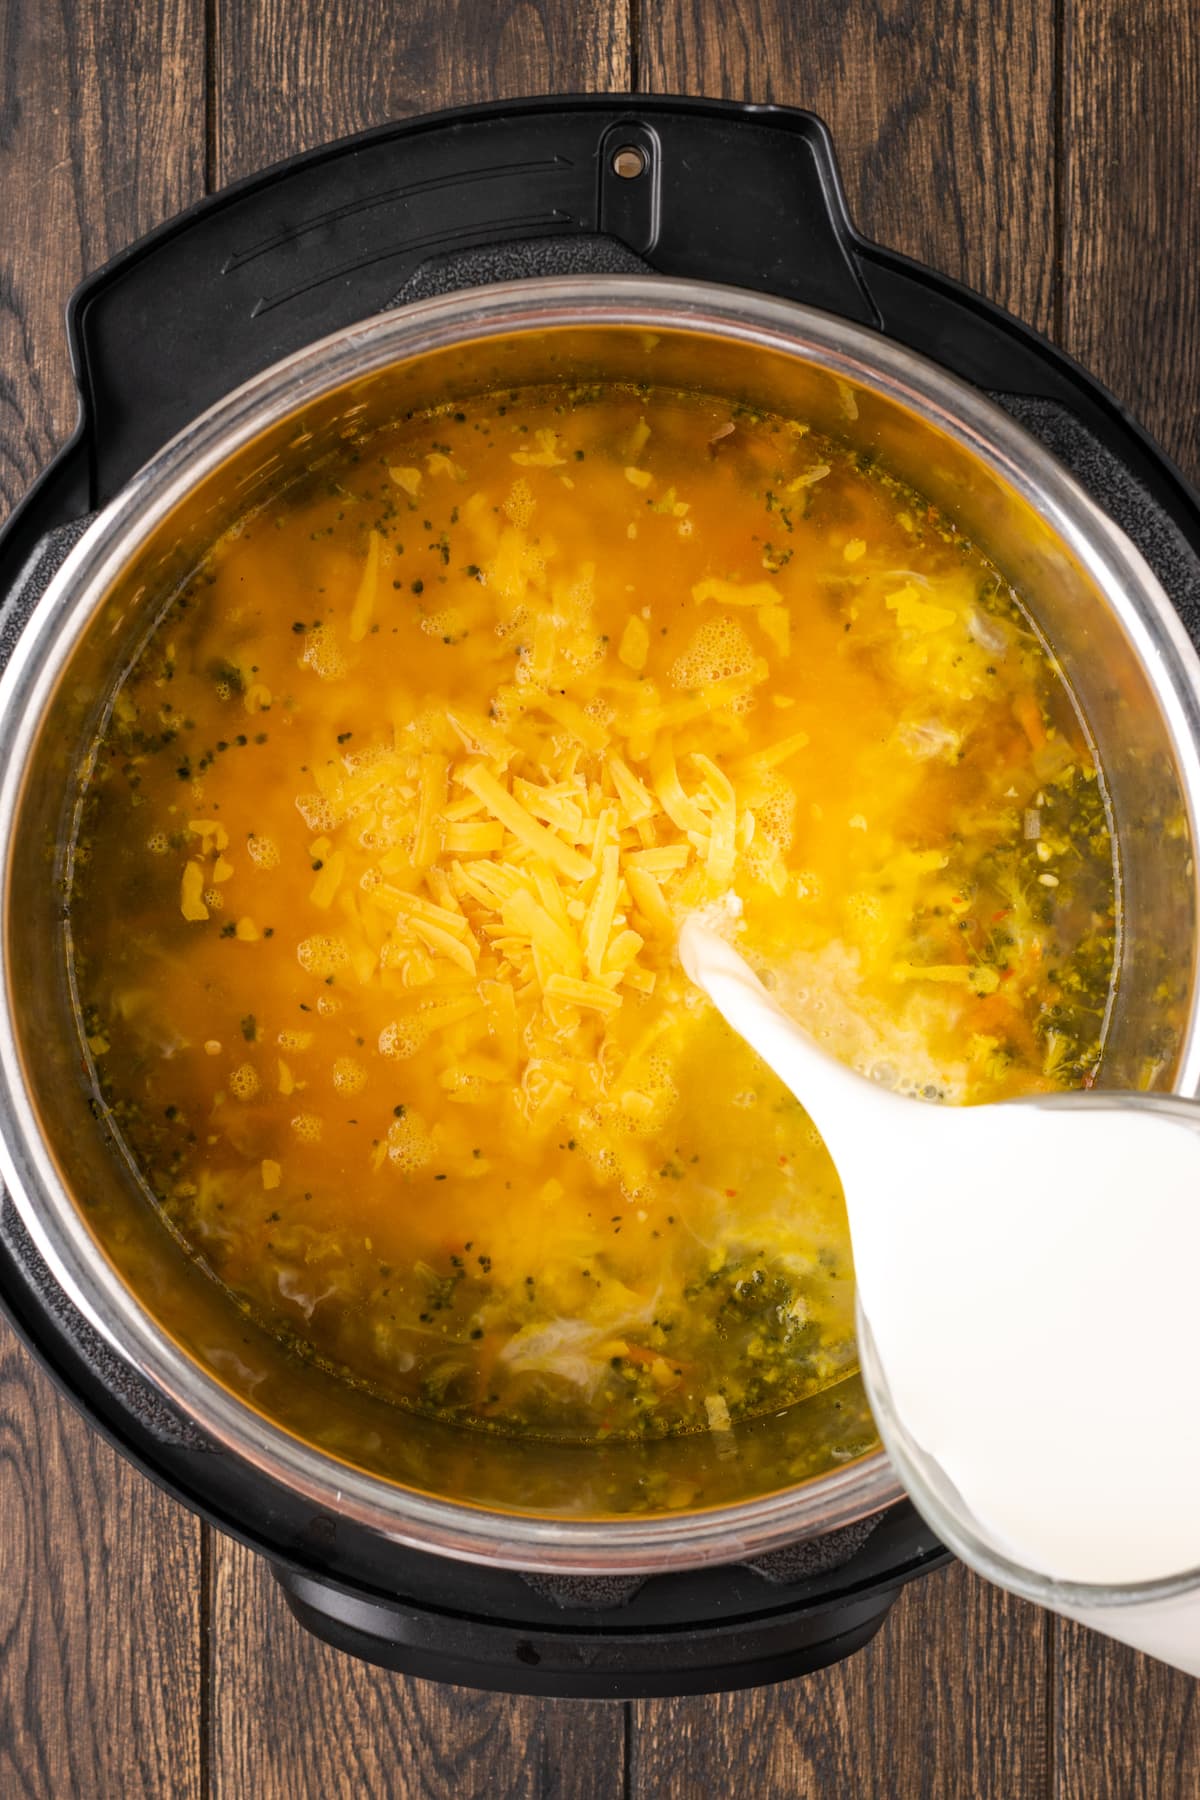 Half-and-half is poured into the instant pot with the other ingredients for broccoli cheddar soup.